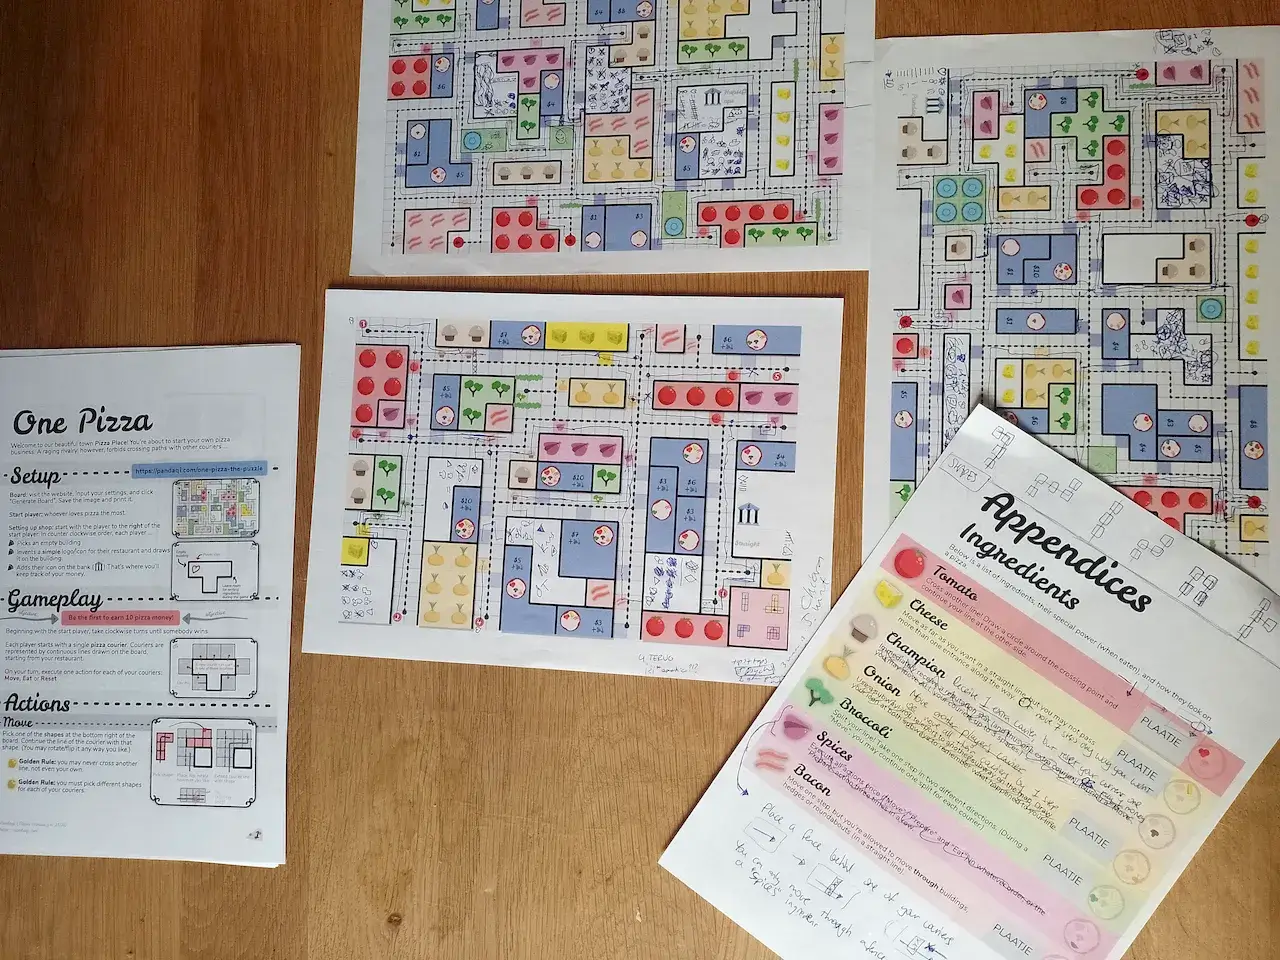 One Pizza: several test games and rulebook. Also notice an OLDER version of the appendices, with placeholder rectangles where images should come, and lots of handwritten notes by me.